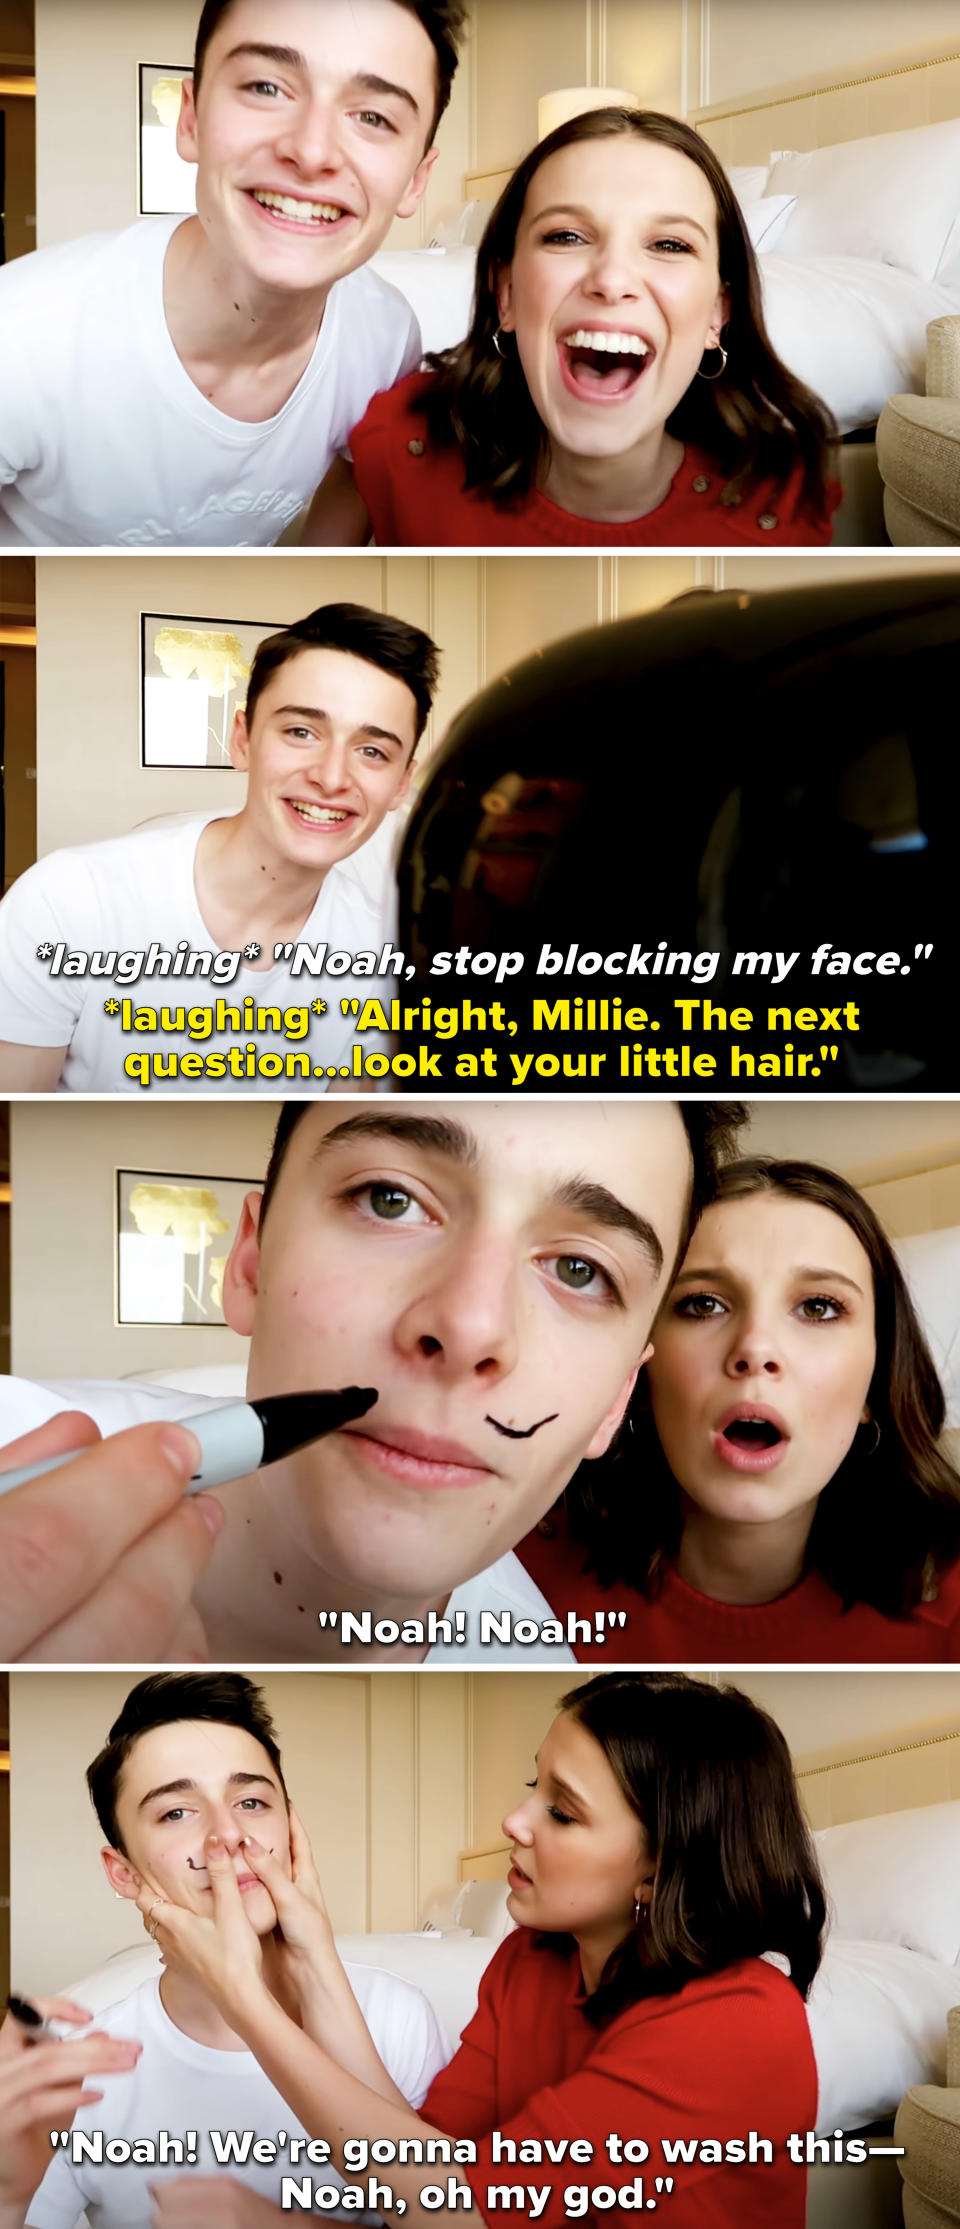 Noah Schnapp drawing a mustache on his face and Millie Bobby Brown looking concerned and saying they'll have to wash it off